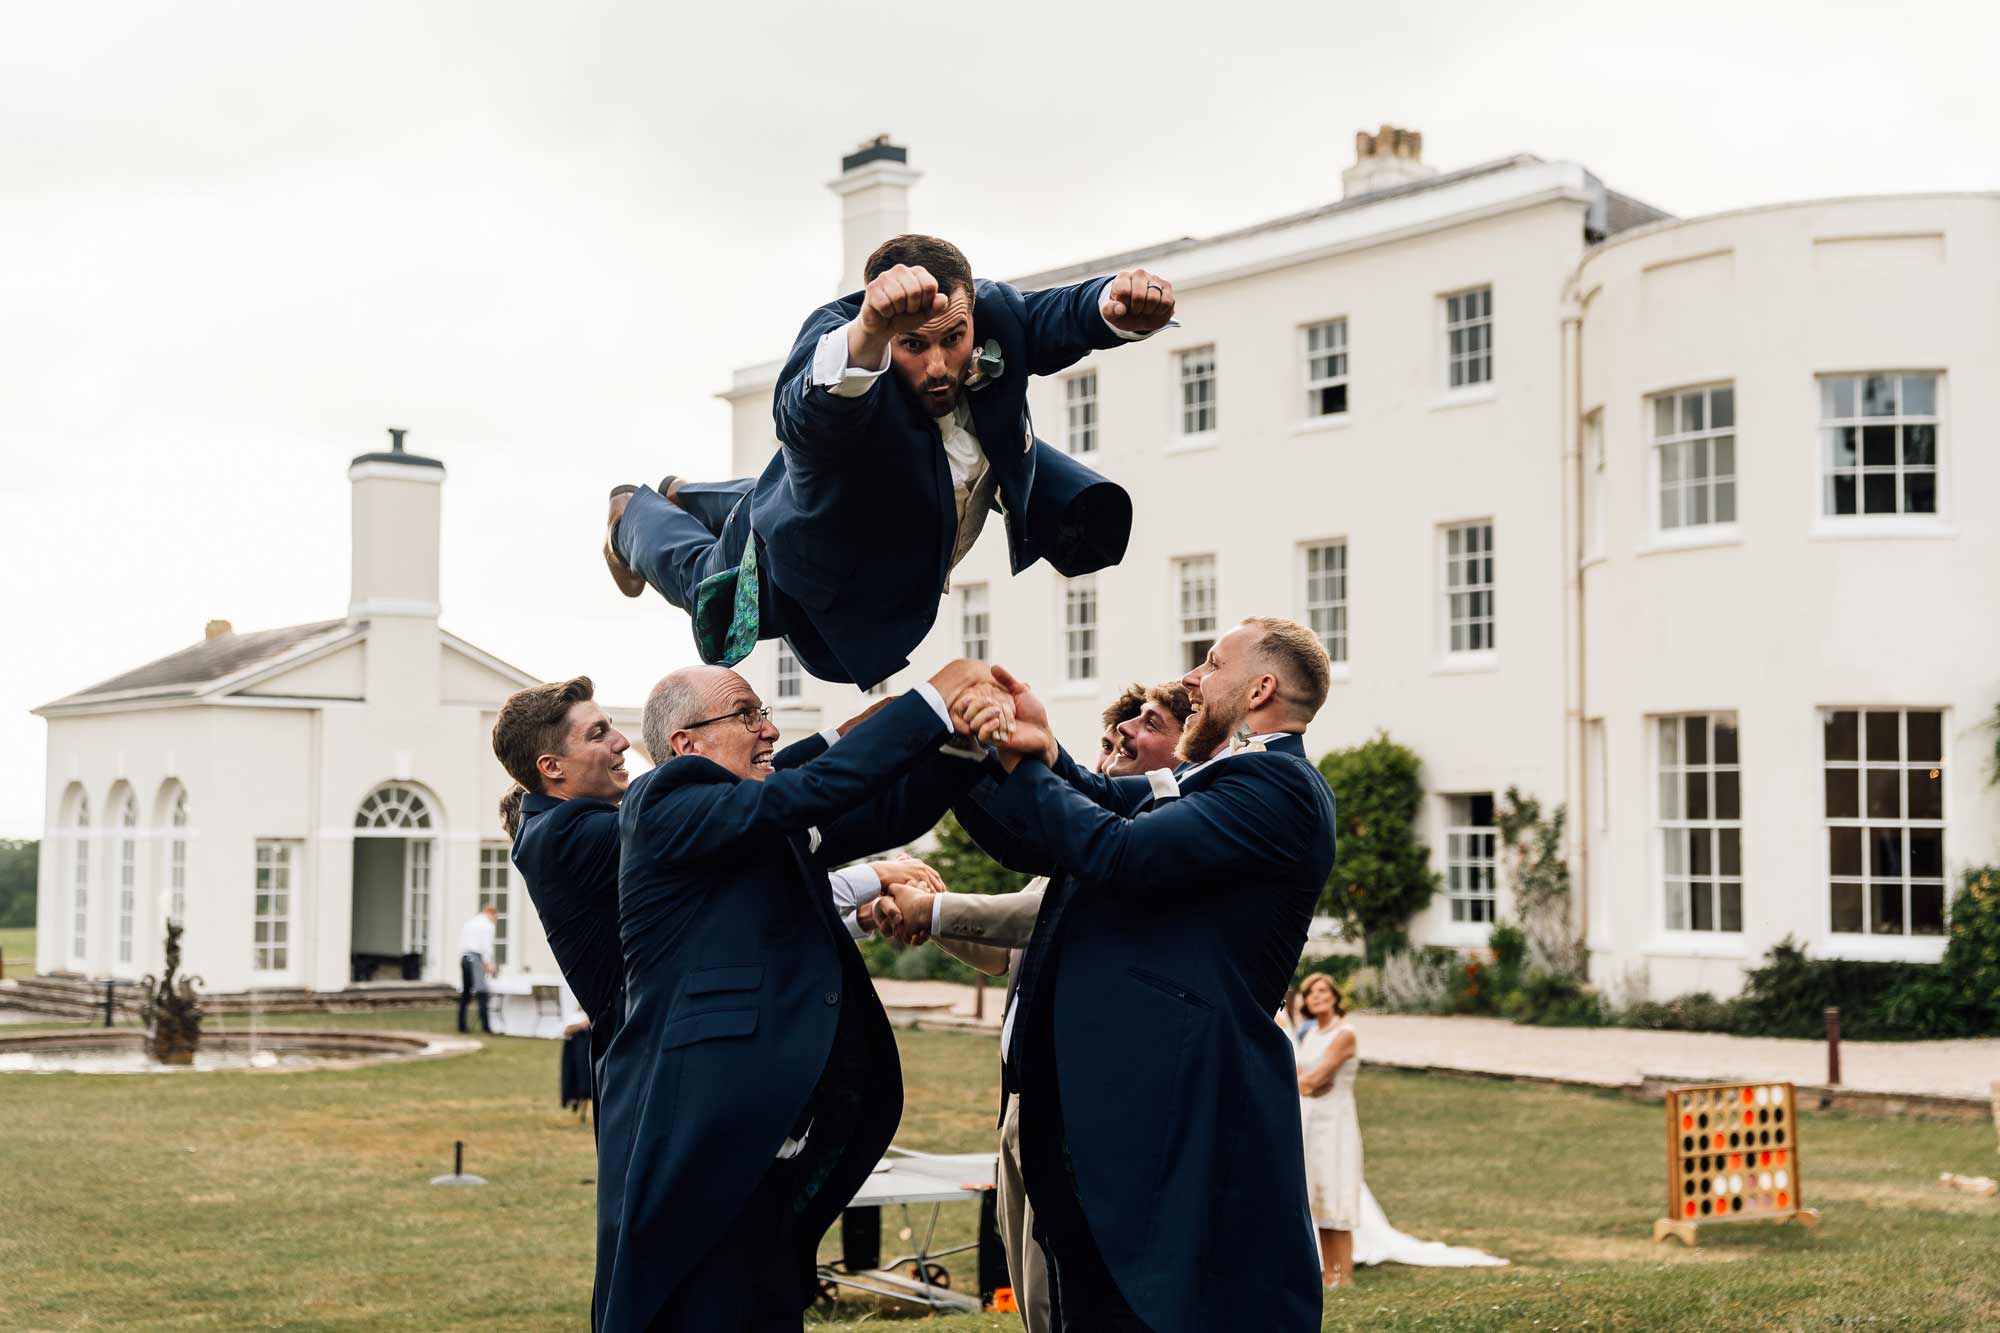 Groom being chucked up in the air at rockbeare manor wedding venue